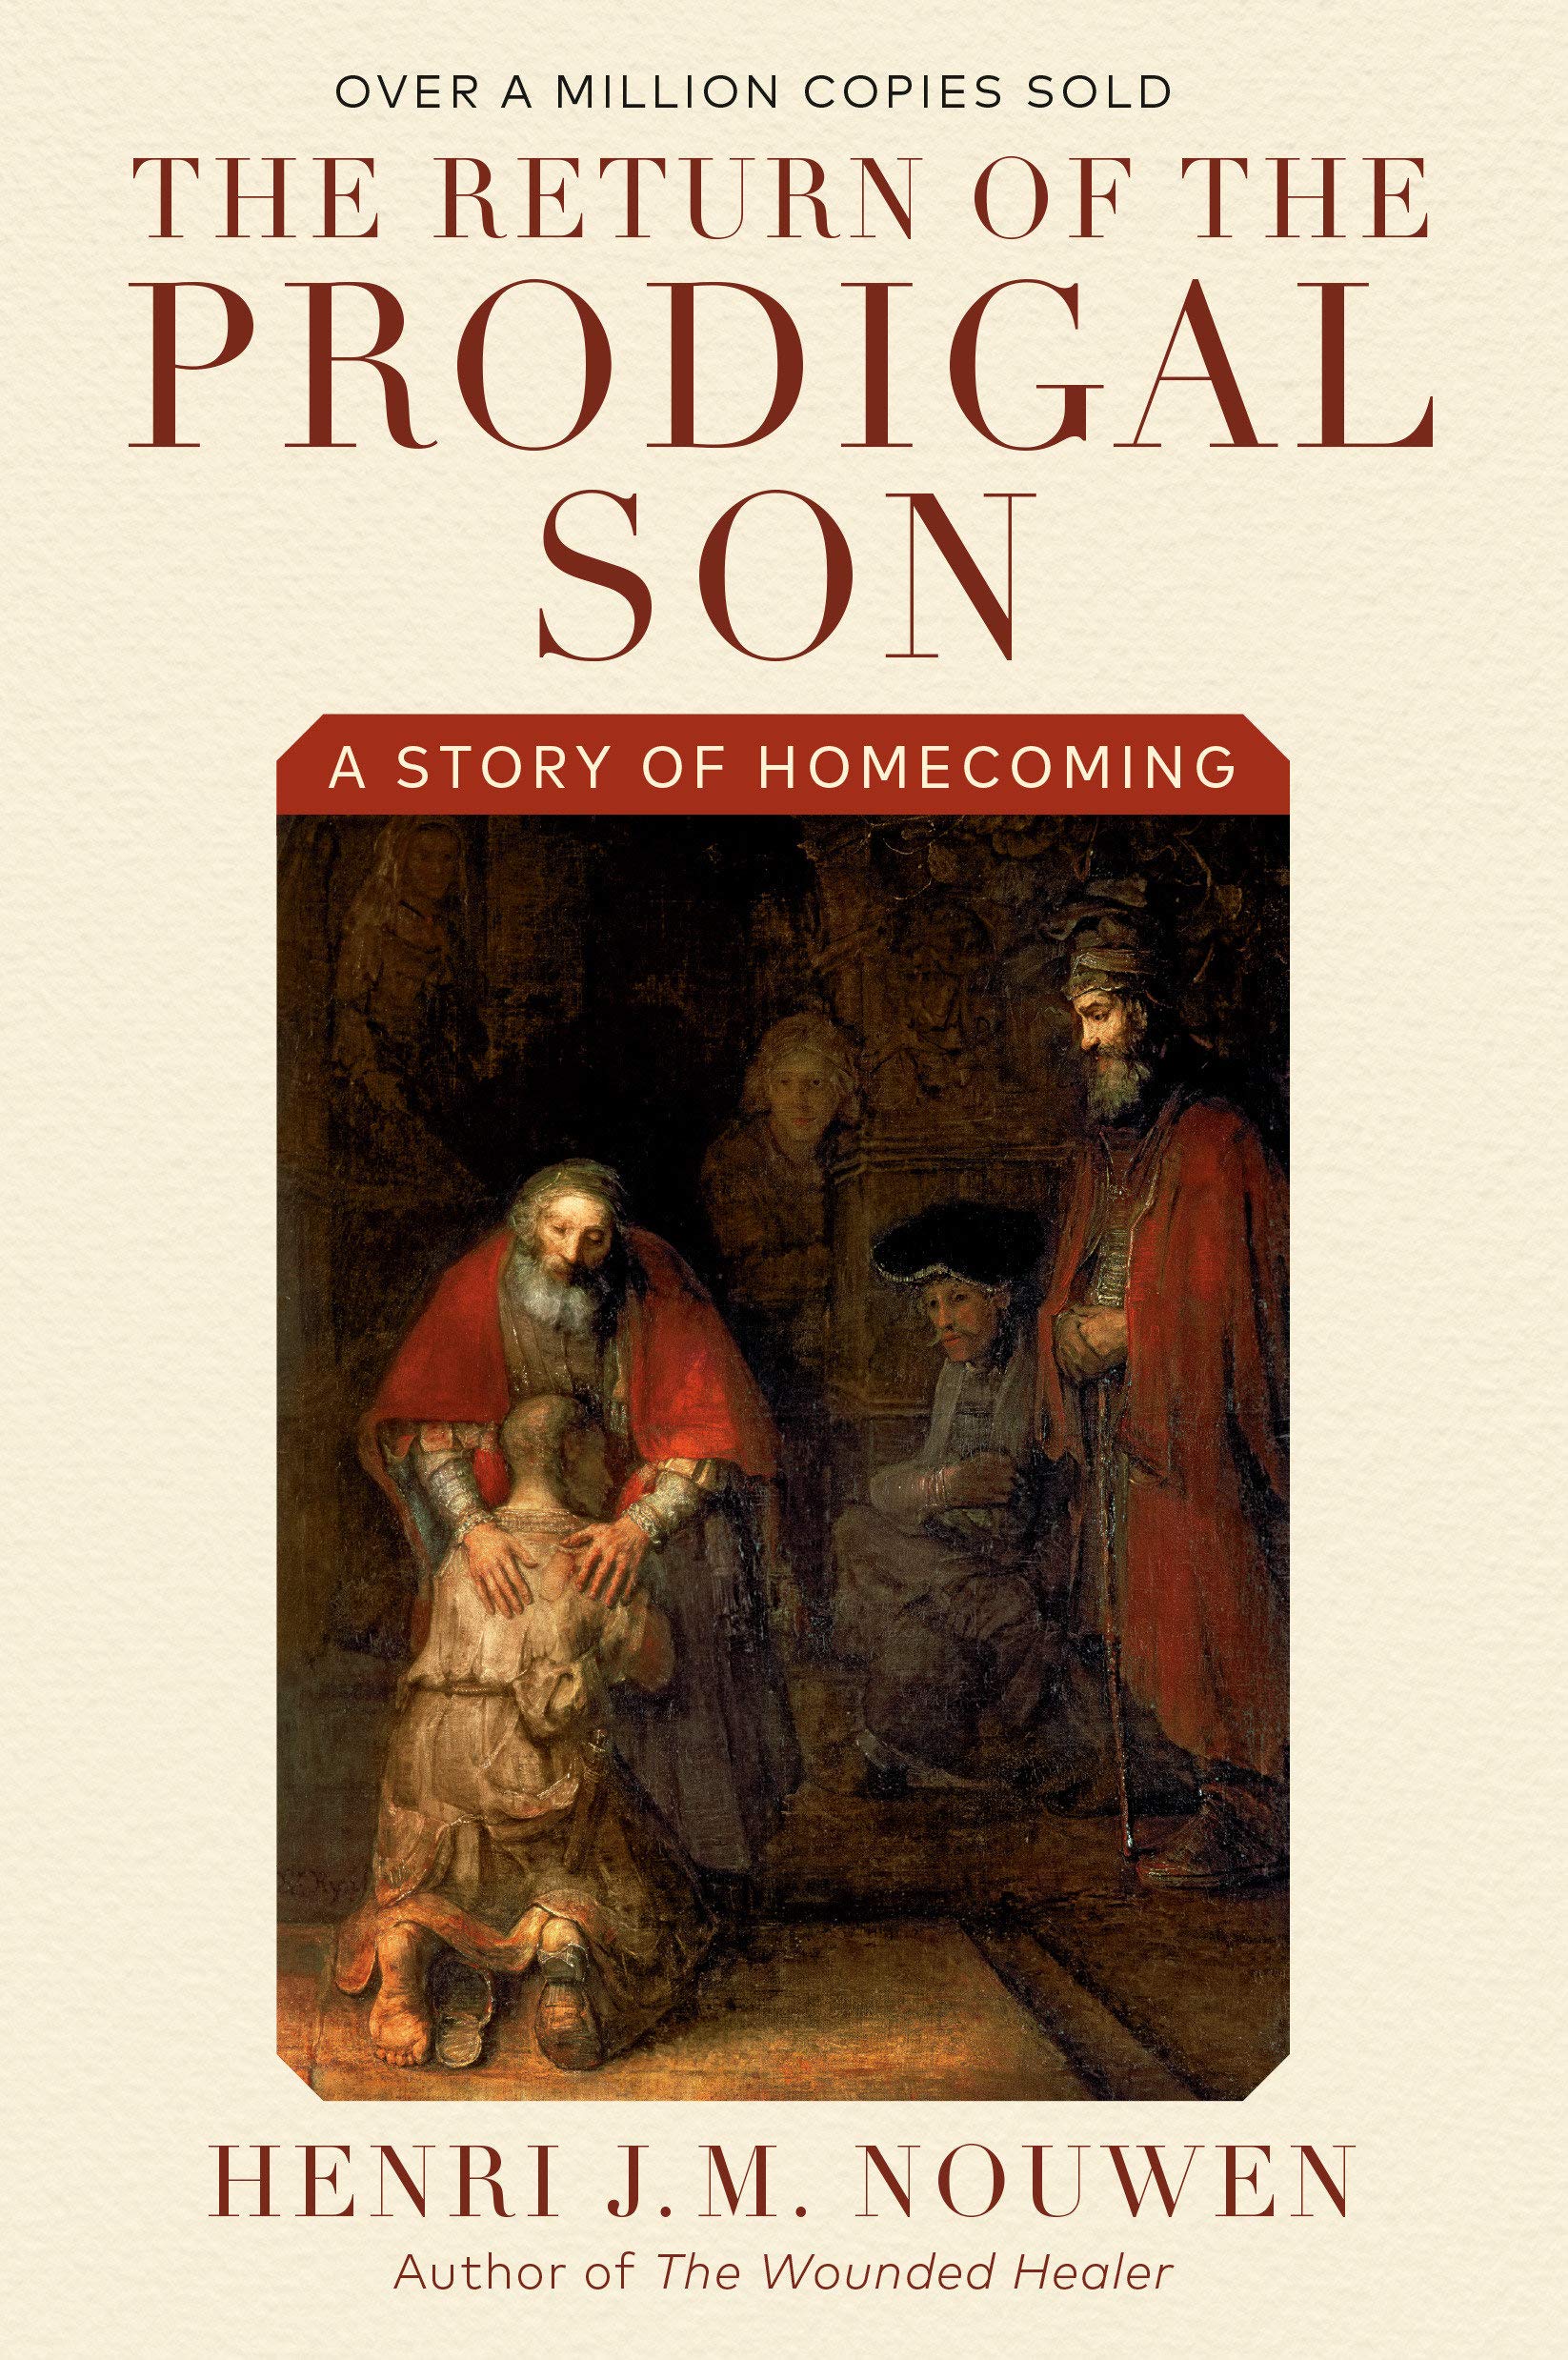 The return of the prodigal son a story of homecoming.jpg